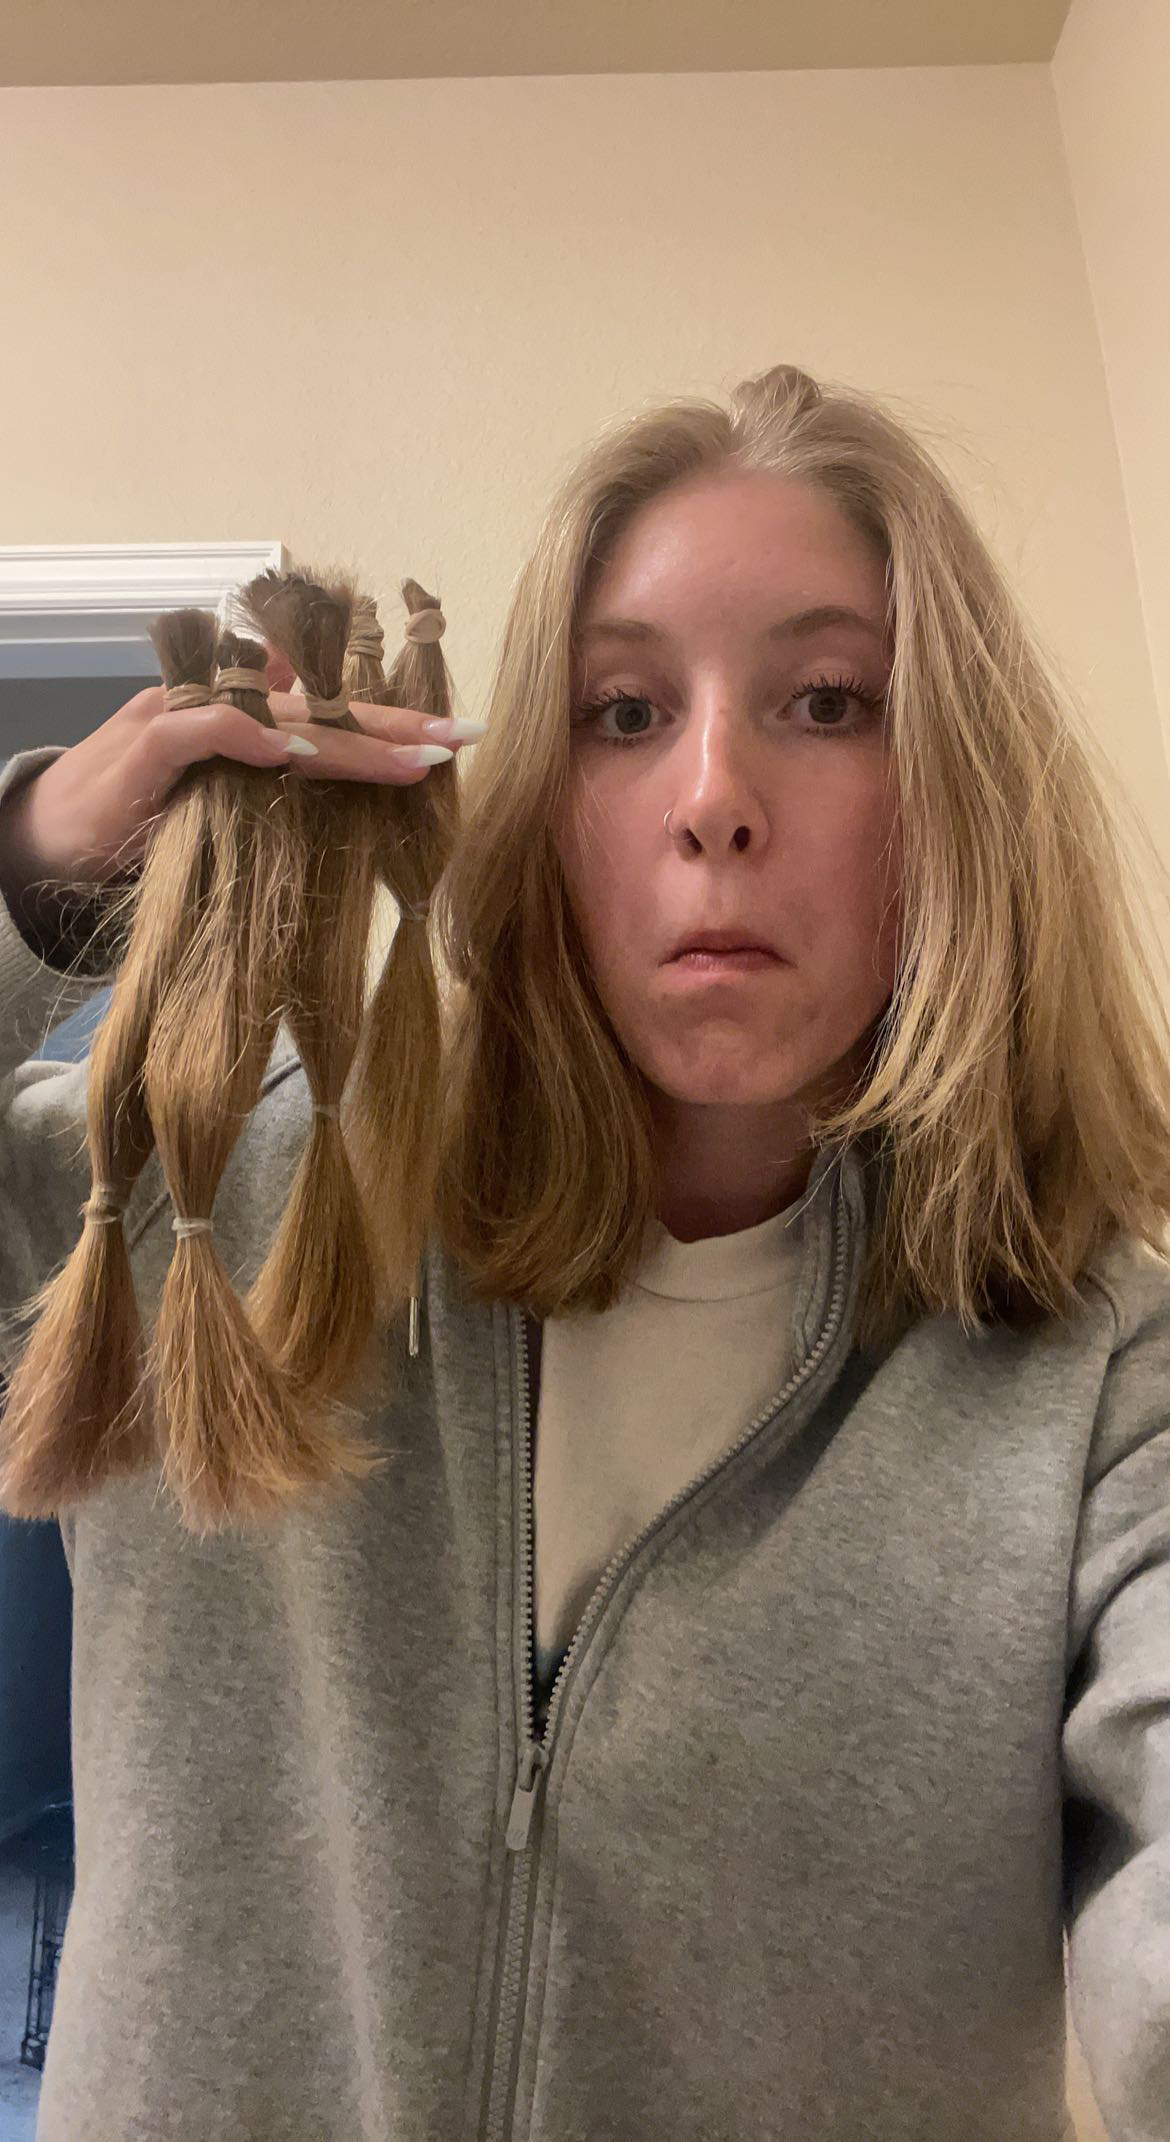 Student holding bunches of recently cut hair